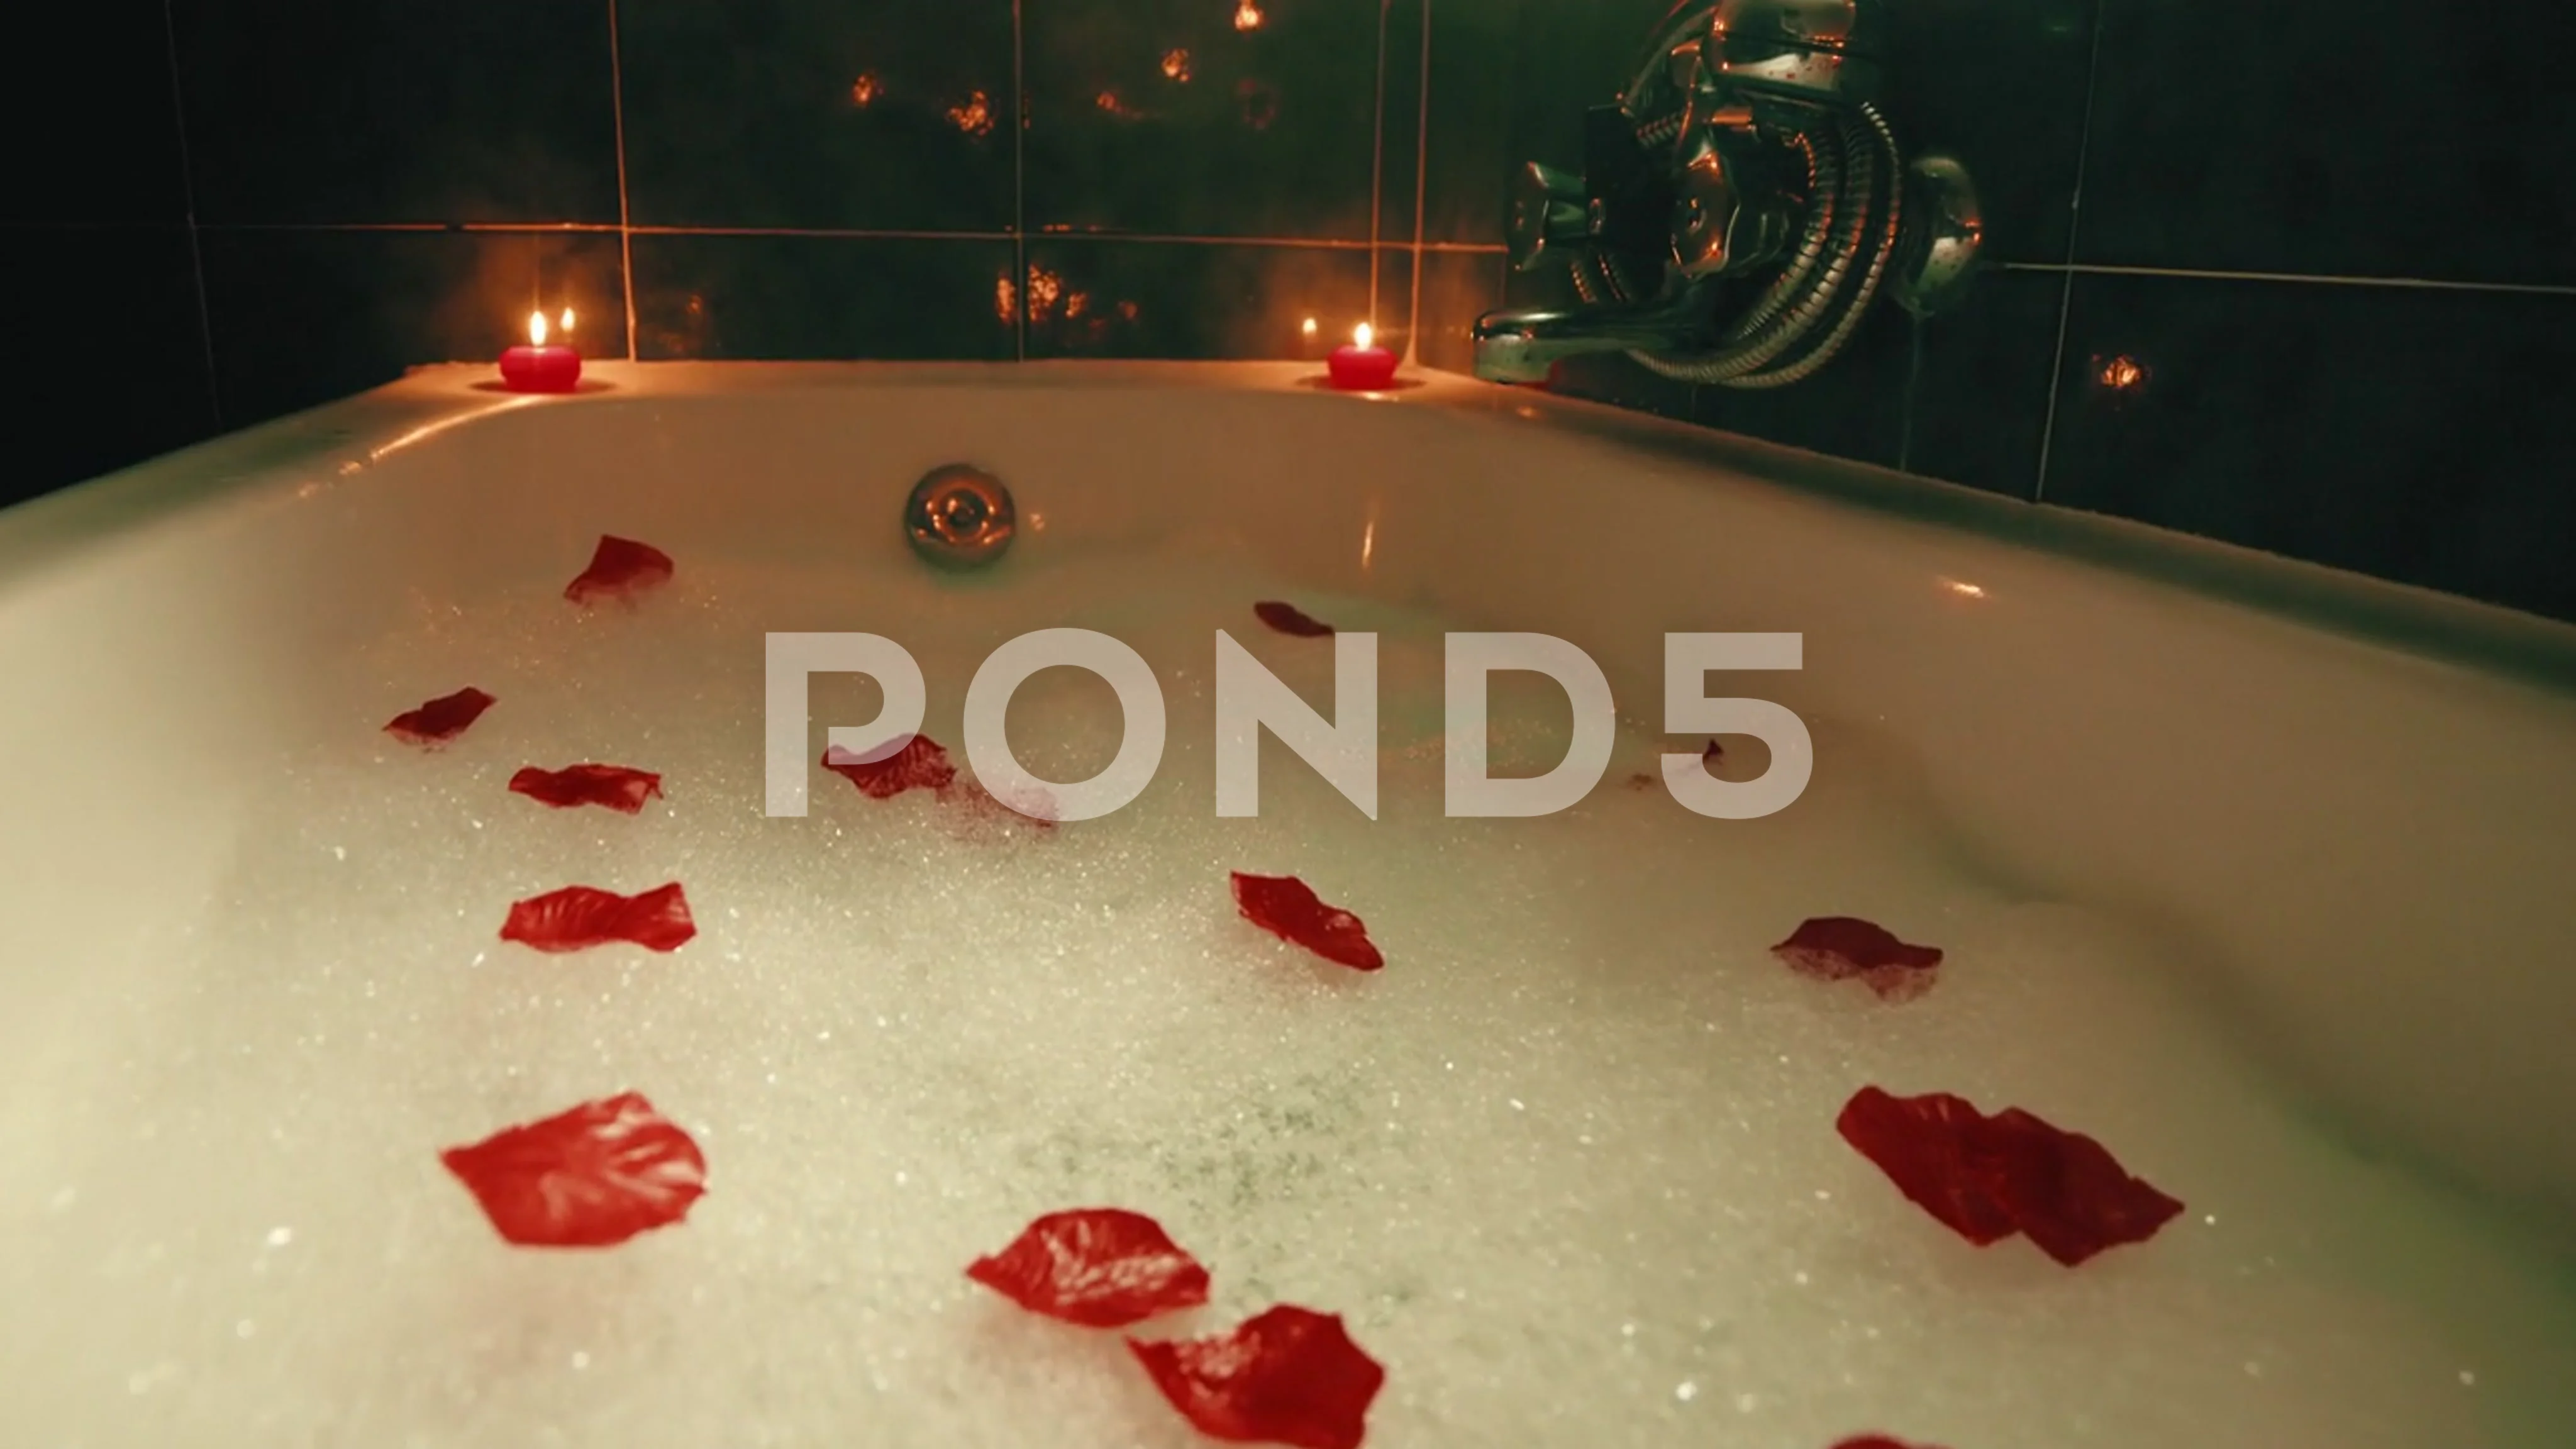 Romantic bathtub with flower petals and , Stock Video